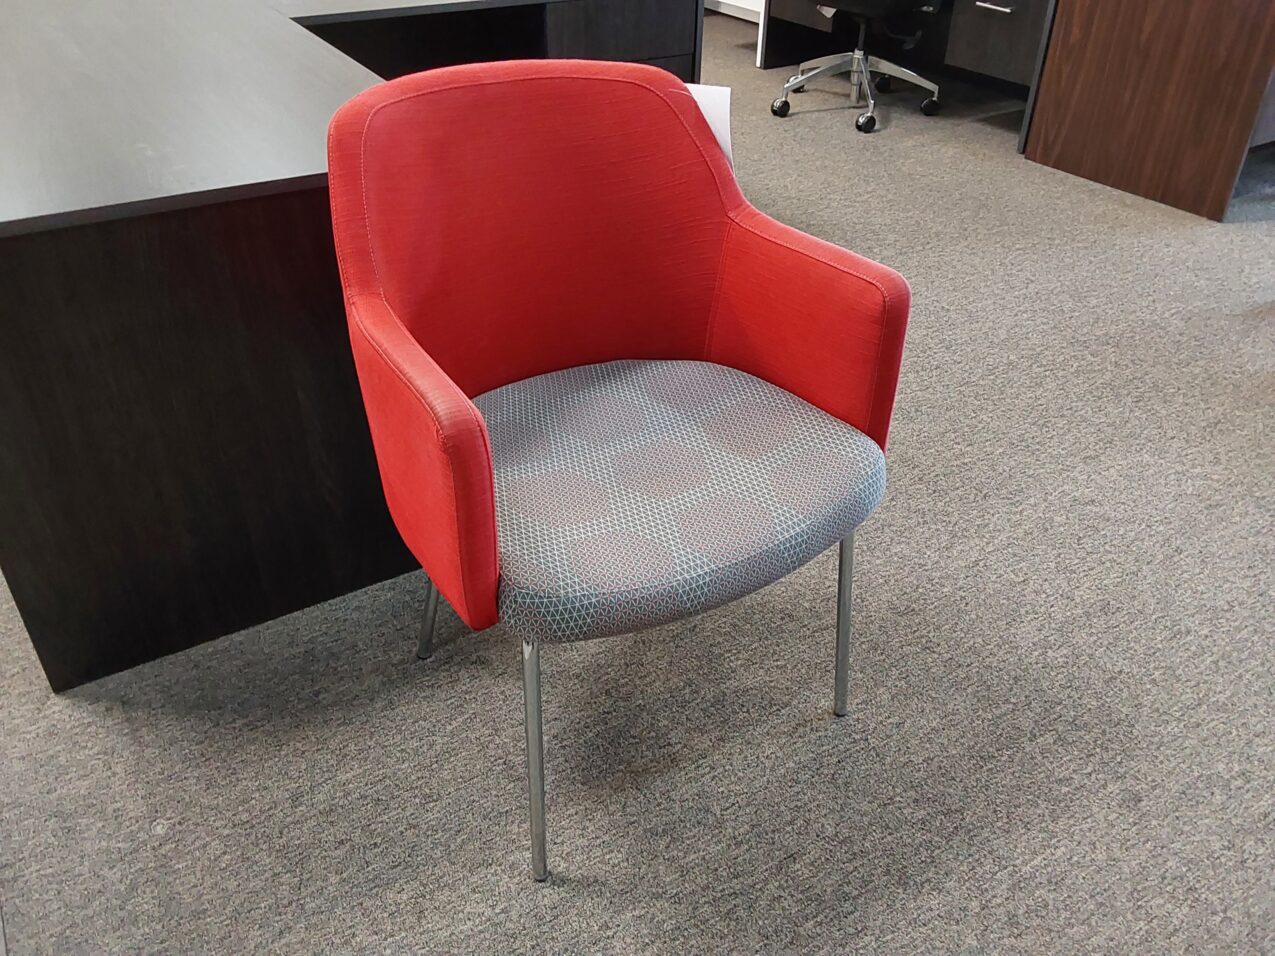 Ofs side chair